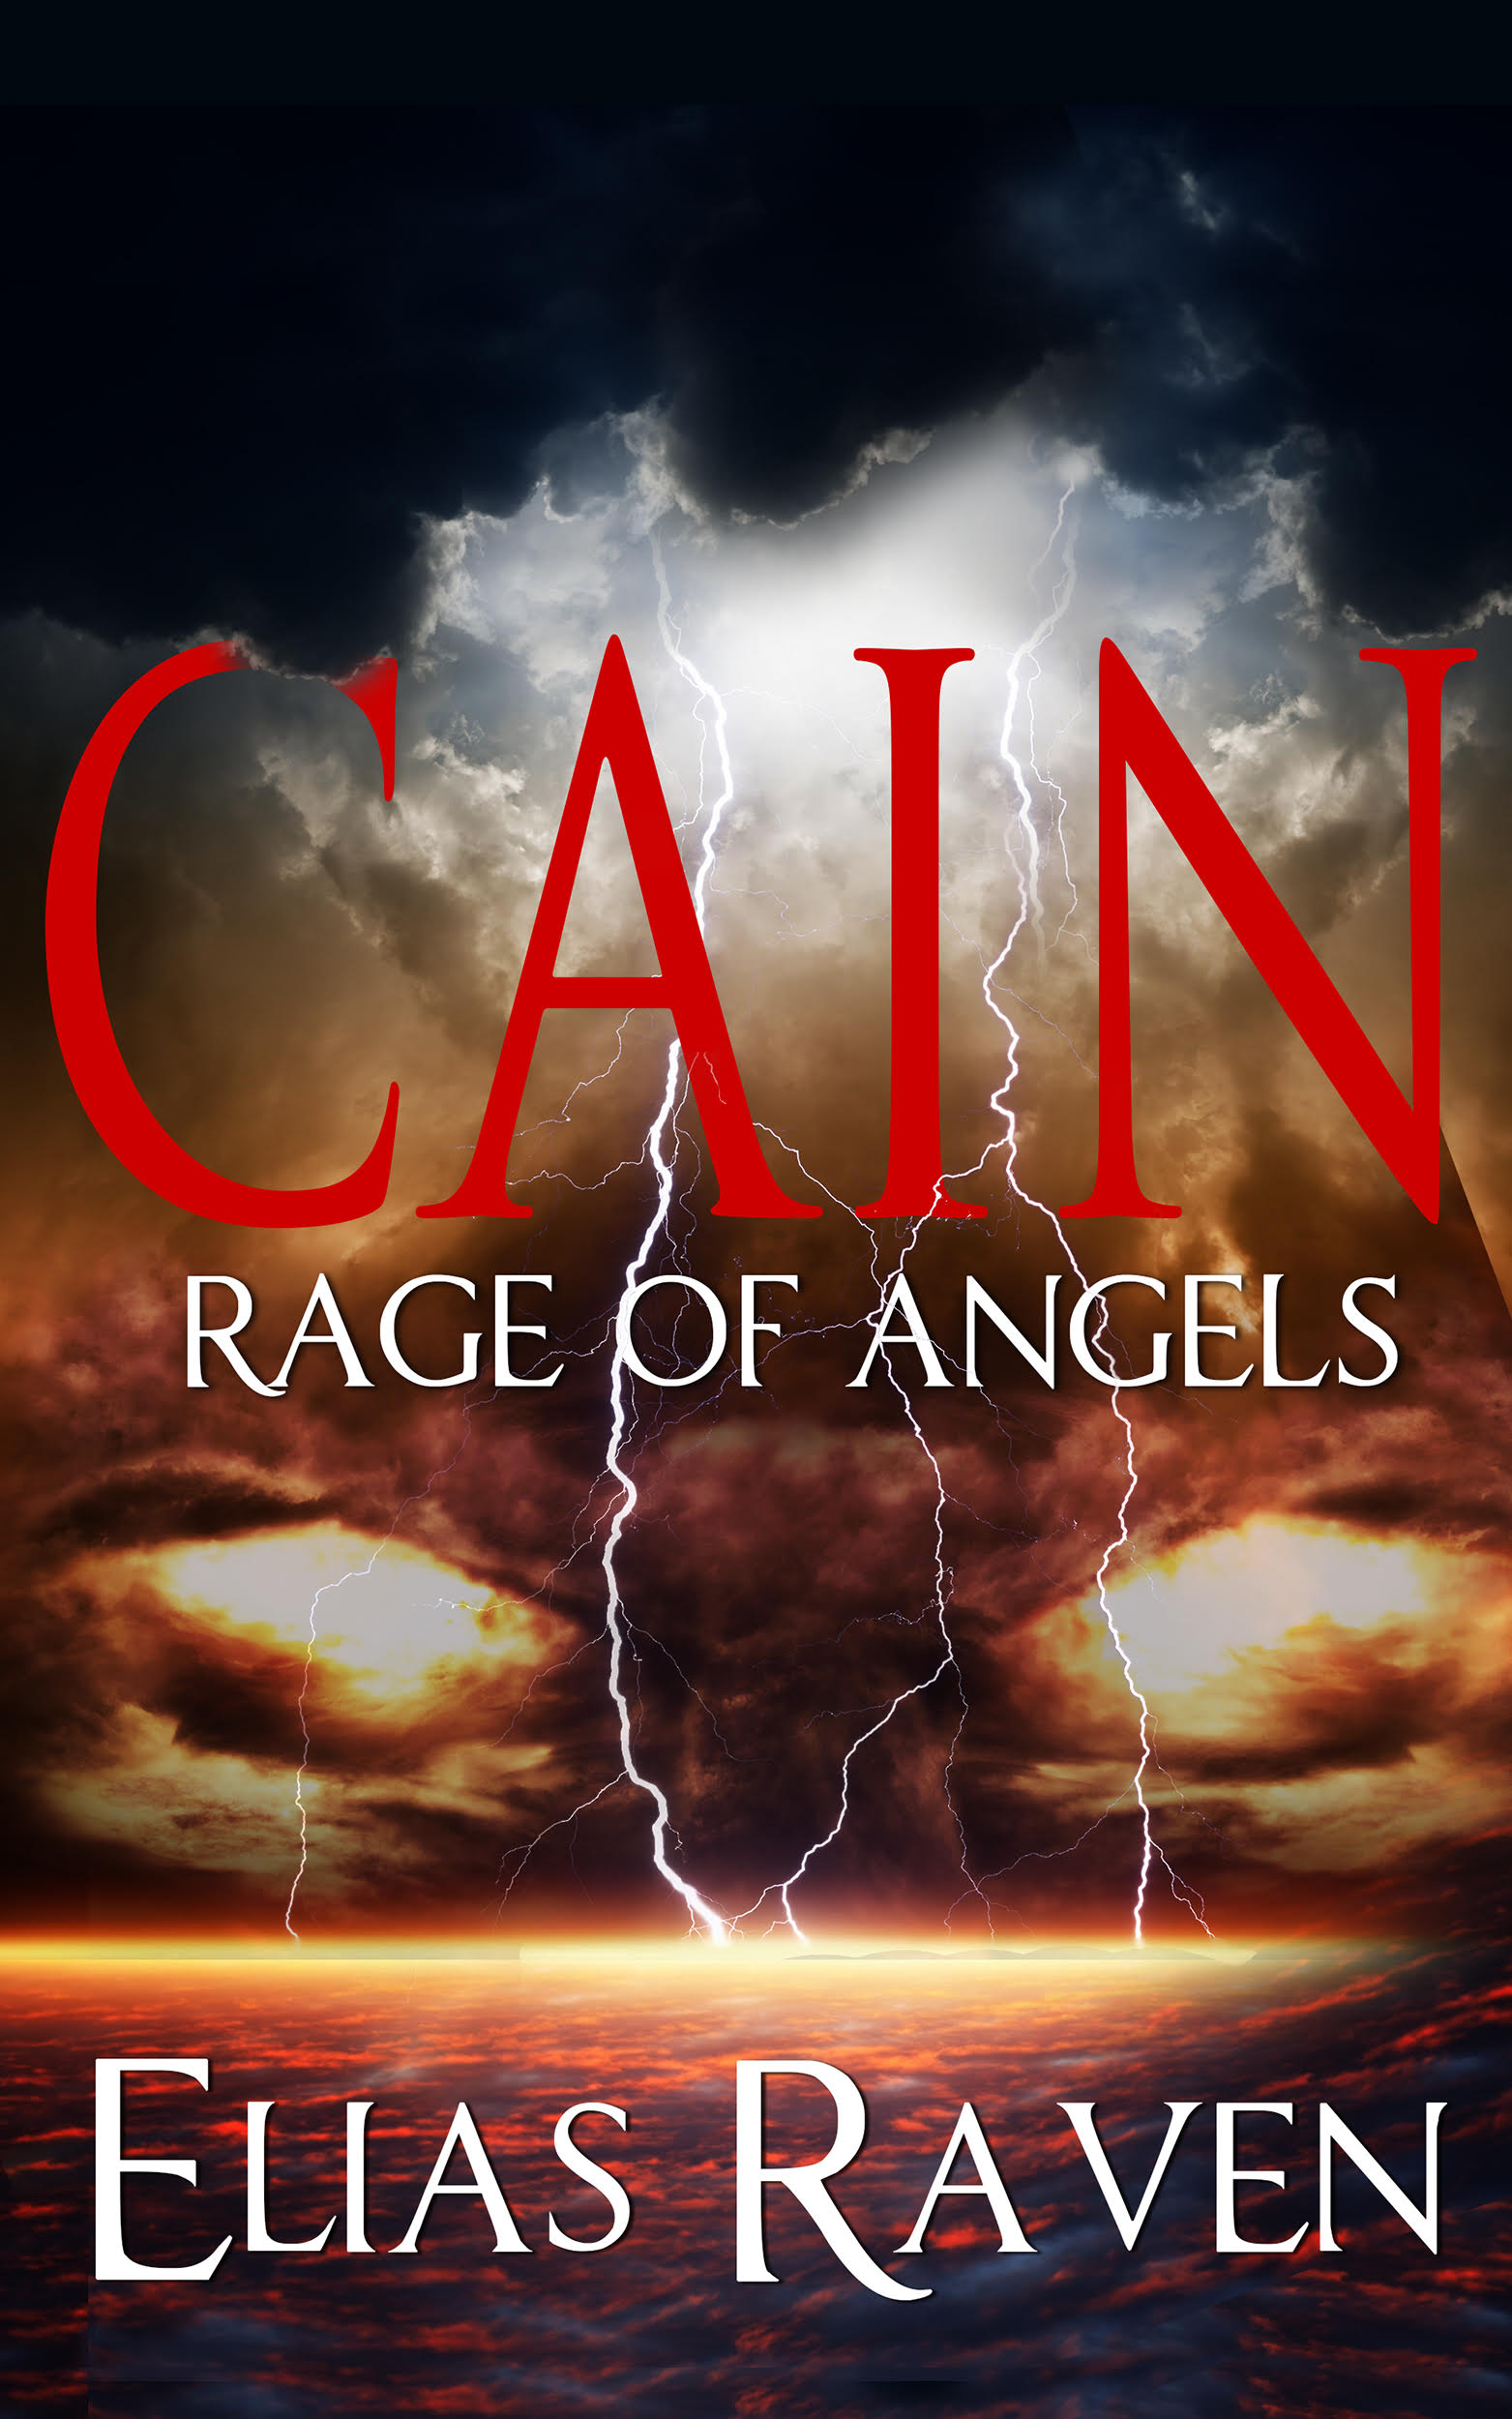 cain-rage-of-angels-cover-high-res